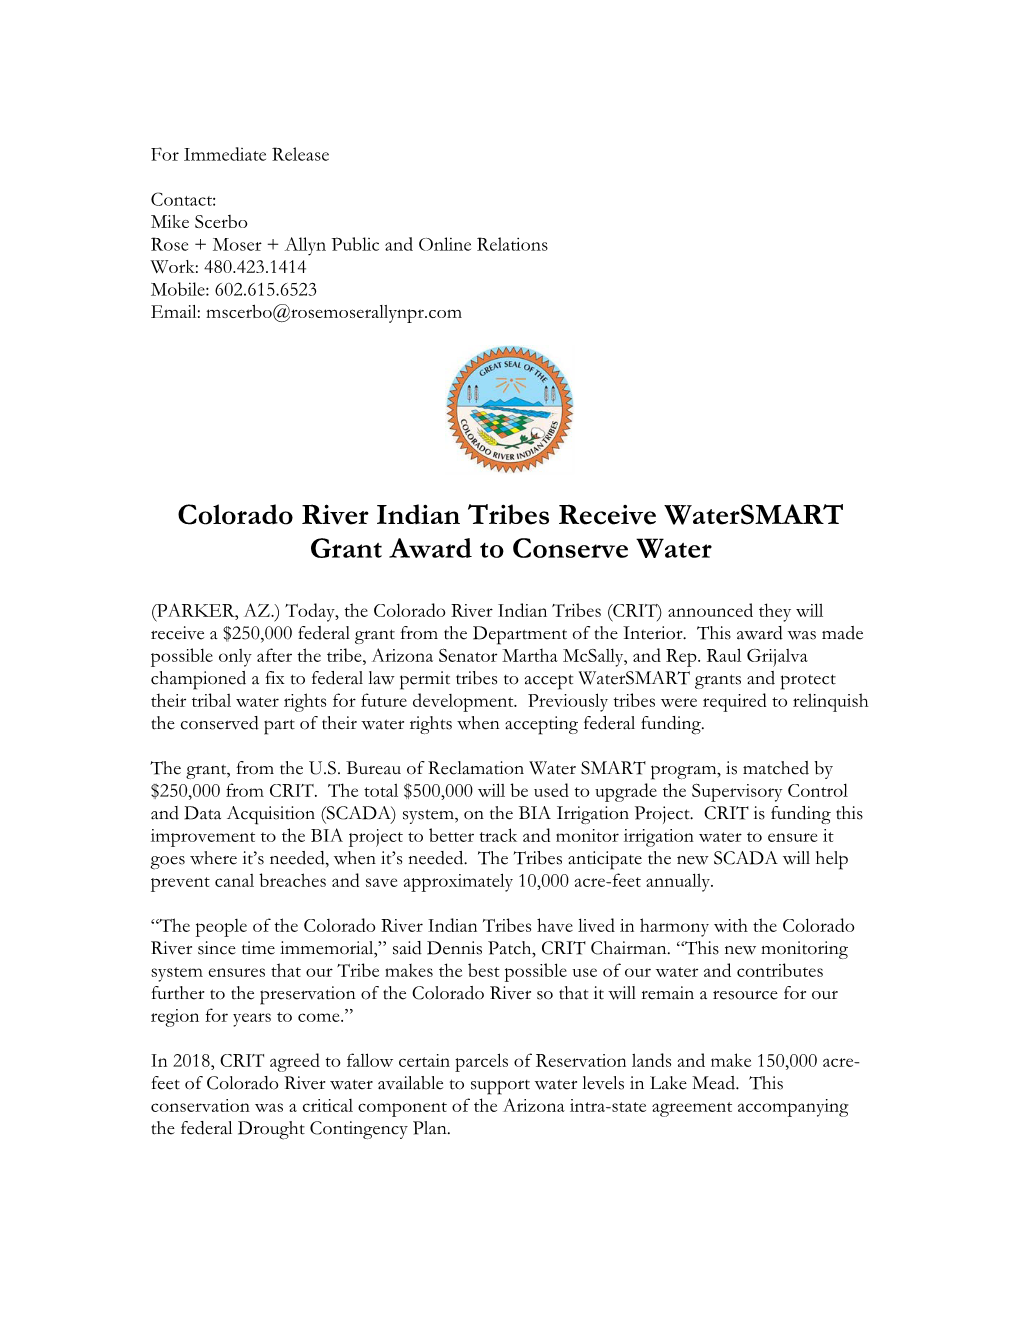 Colorado River Indian Tribes Receive Watersmart Grant Award to Conserve Water